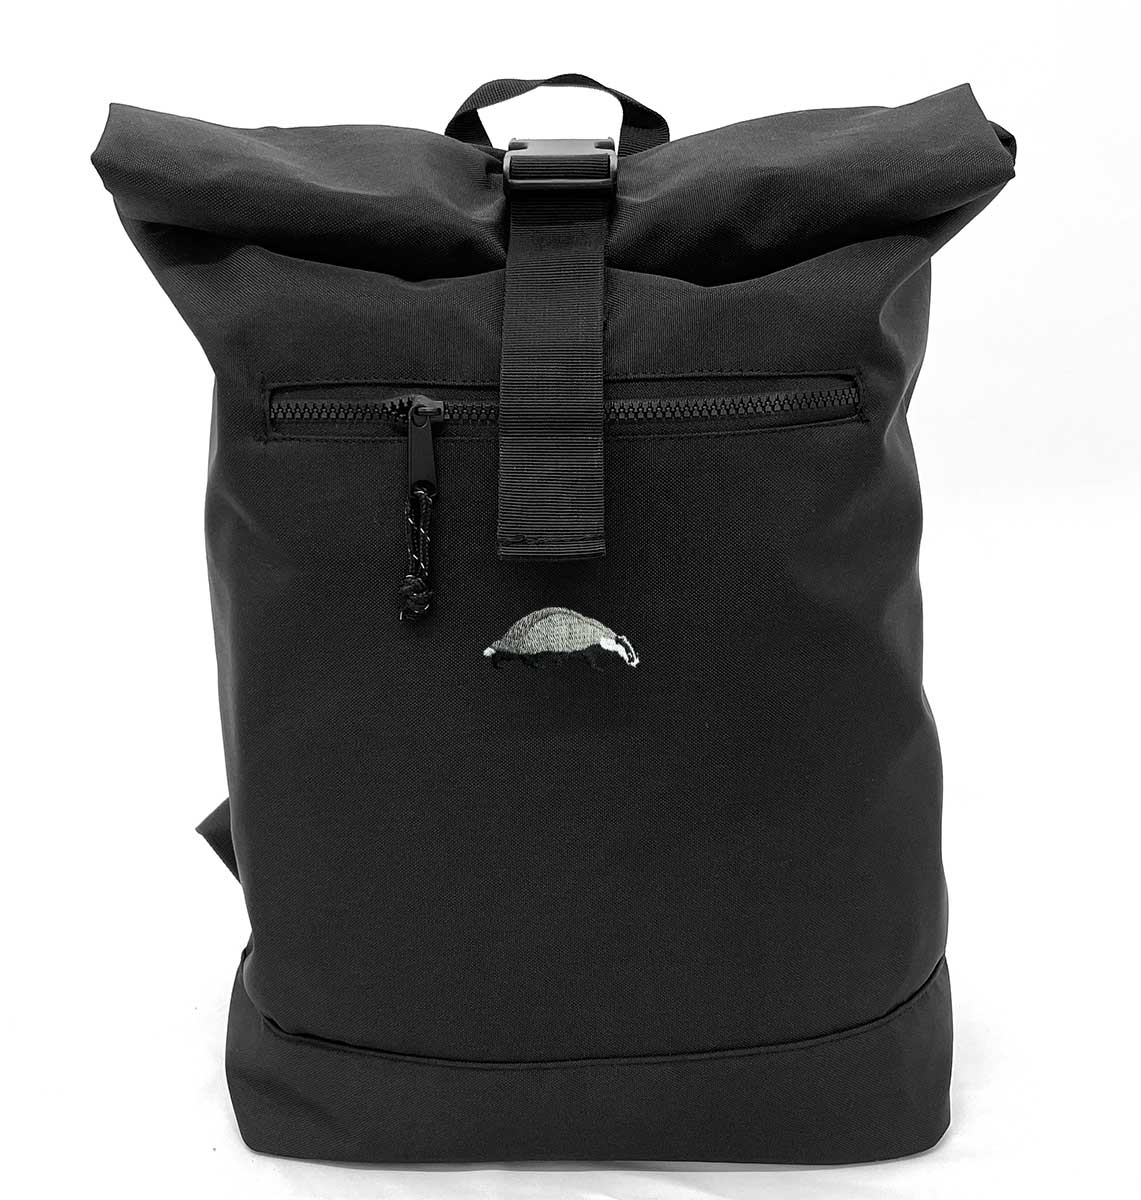 Badger Beach Roll-top Recycled Backpack - Blue Panda